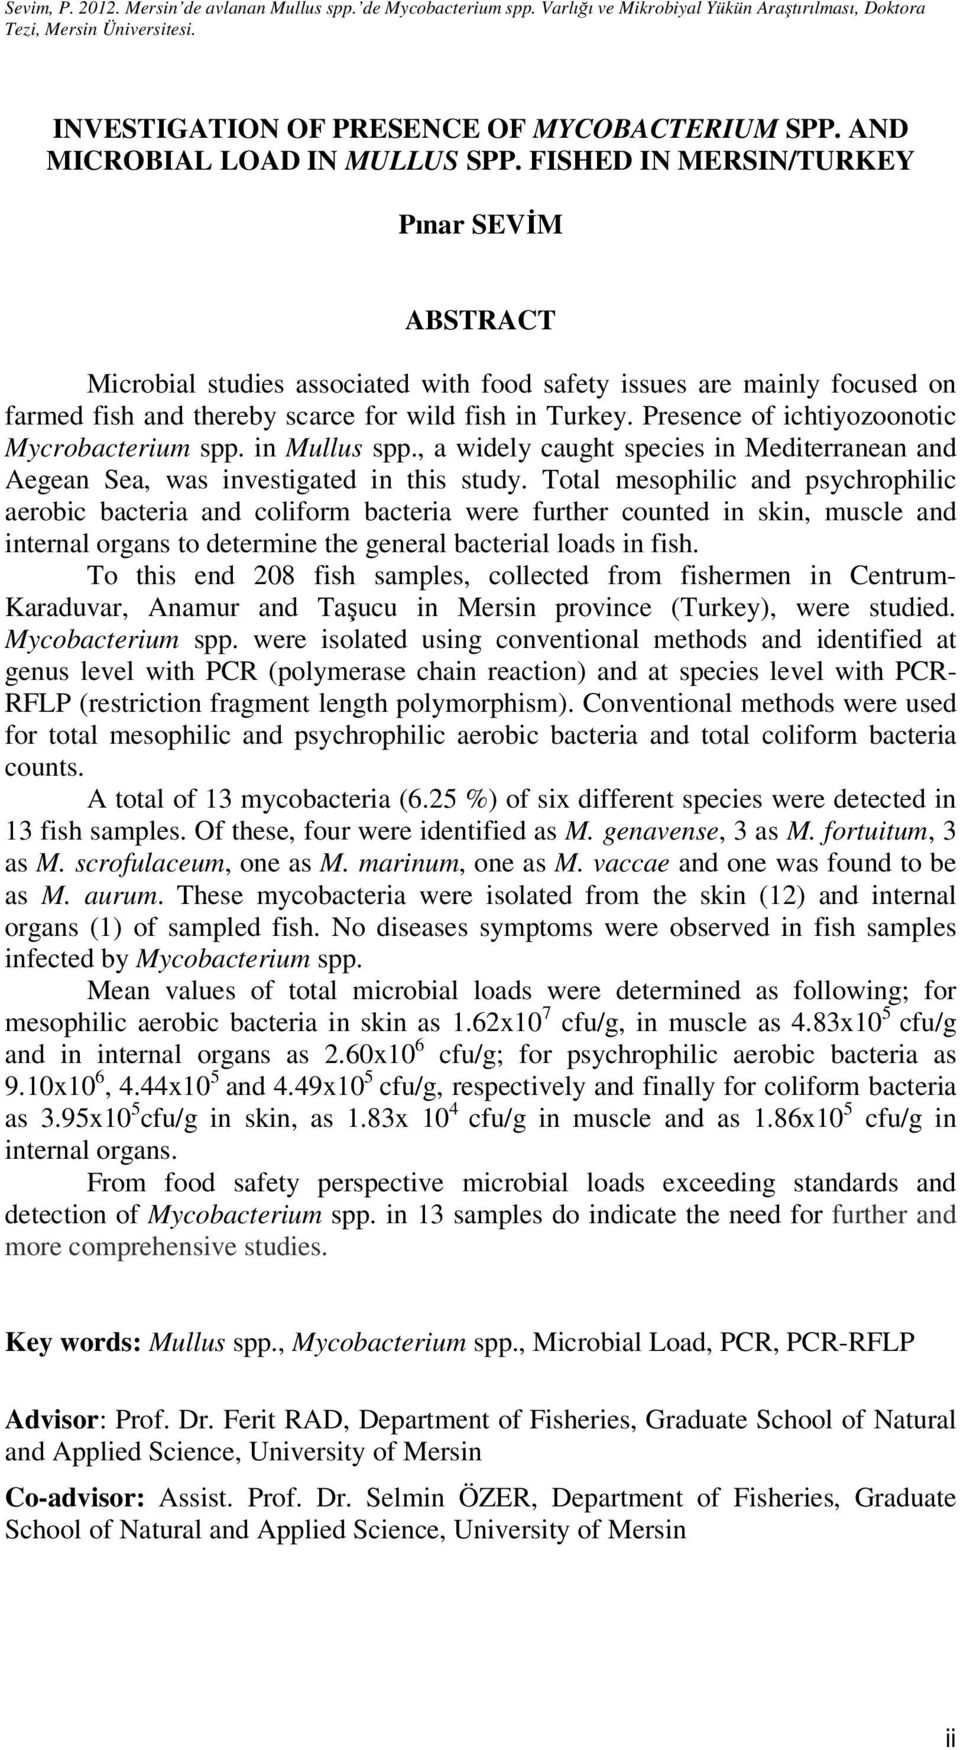 Presence of ichtiyozoonotic Mycrobacterium spp. in Mullus spp., a widely caught species in Mediterranean and Aegean Sea, was investigated in this study.